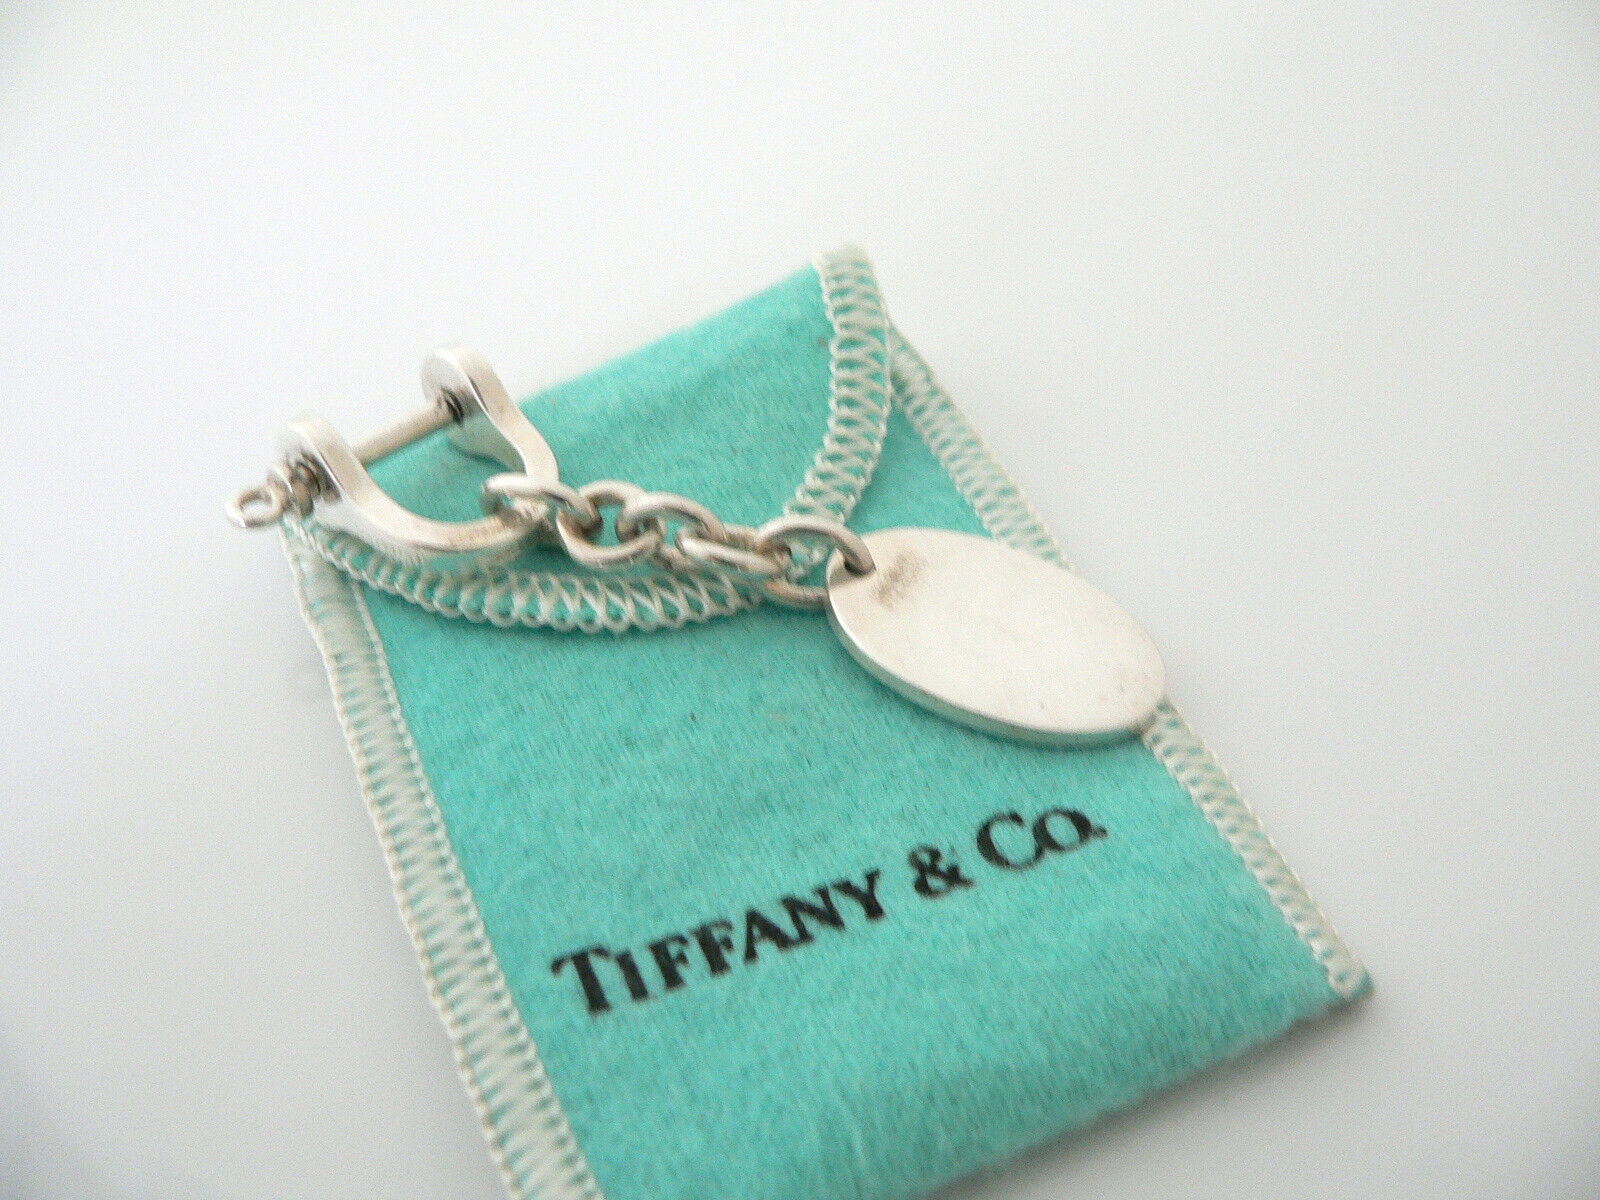 Tiffany & Co Silver Shackle Oval Key Ring Keychain Key Chain Gift Pouch Love